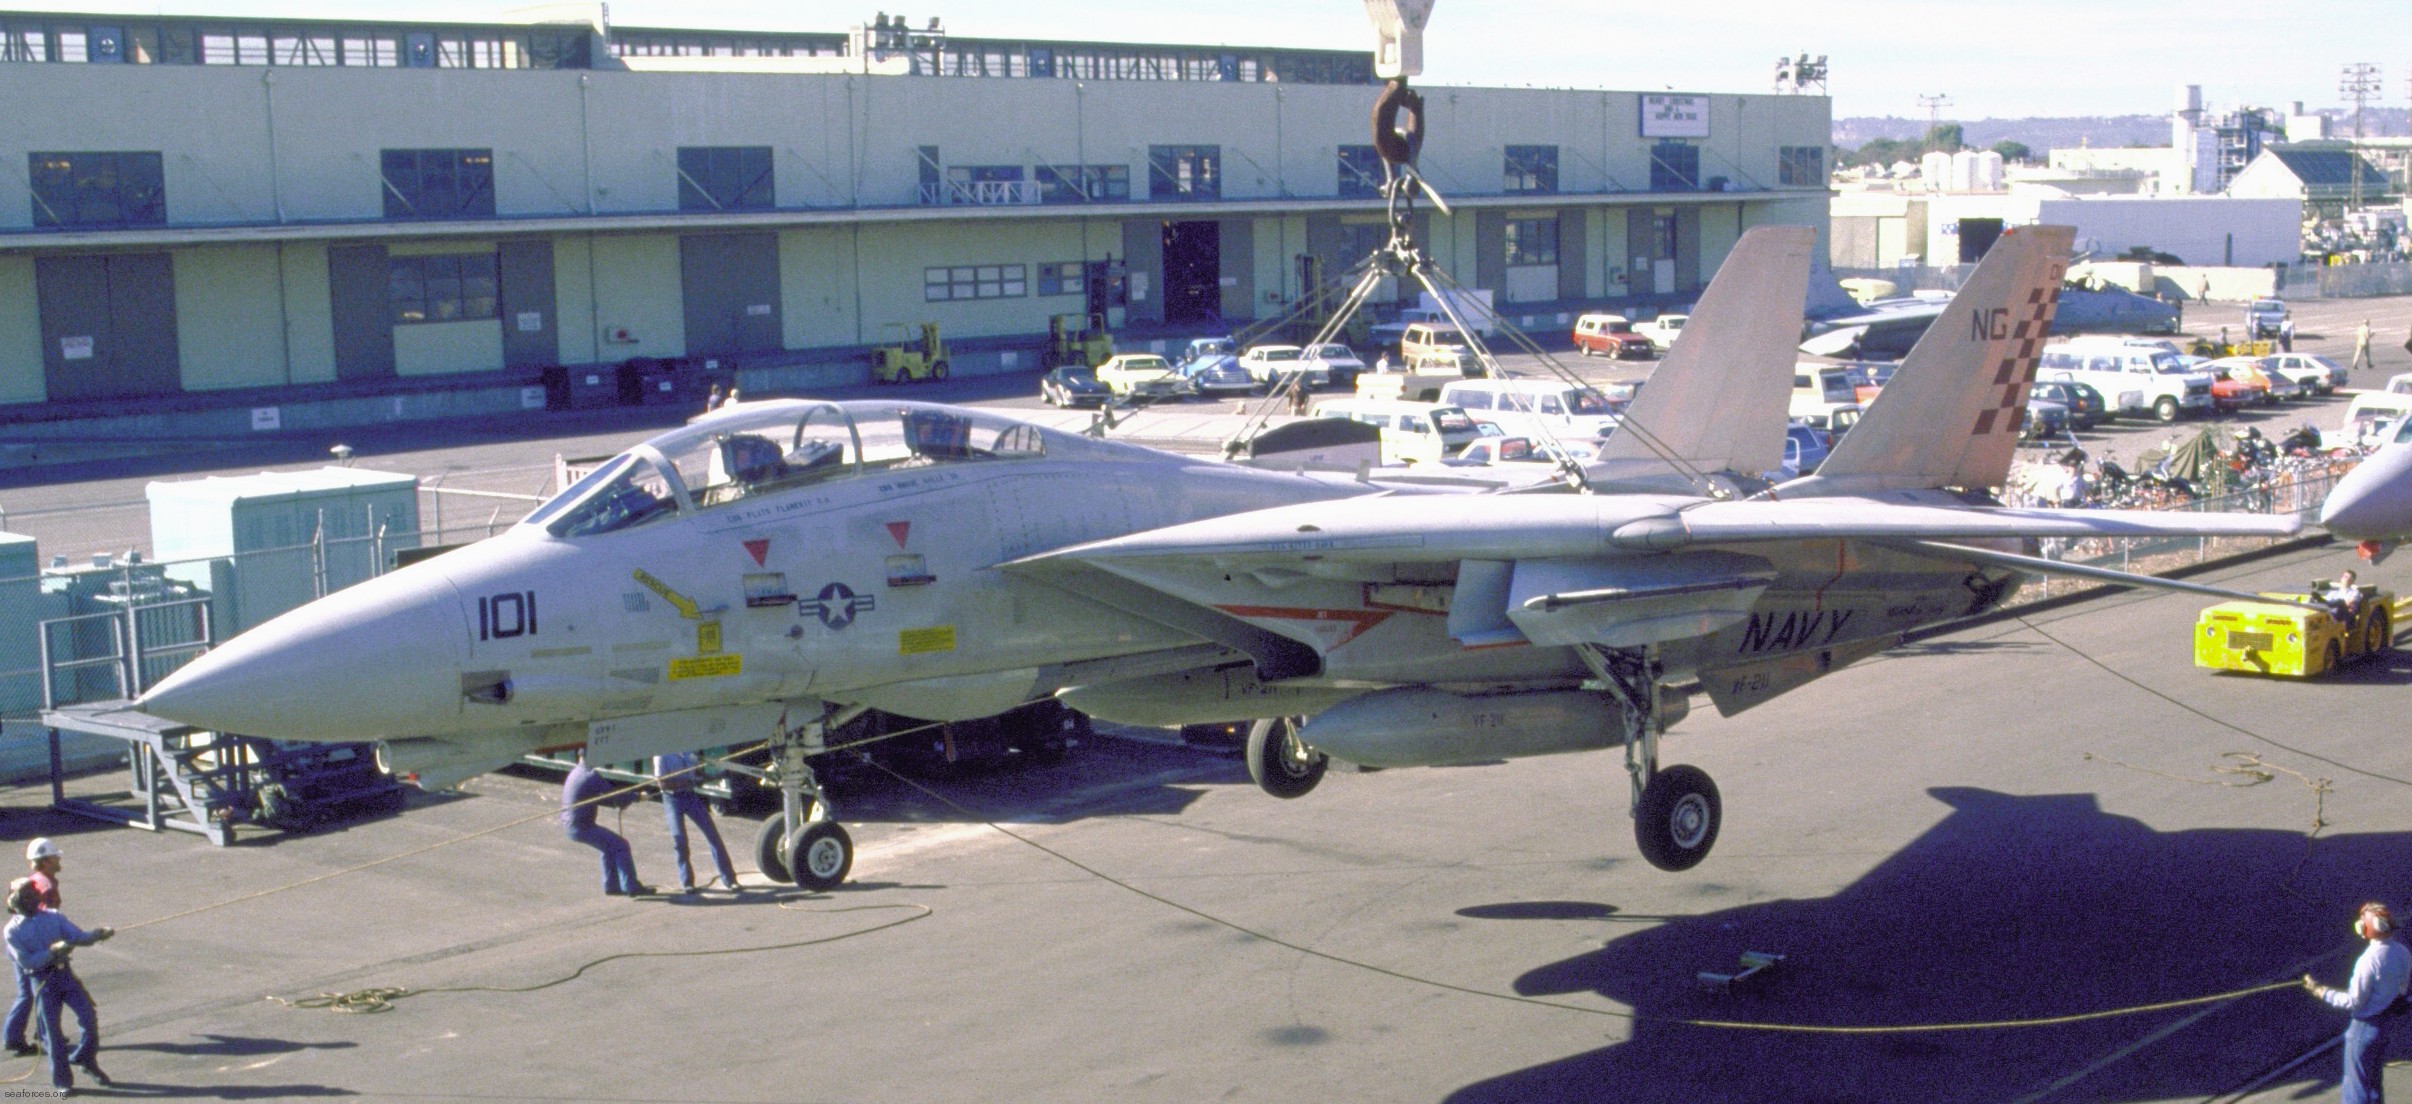 vf-211 fighting checkmates fighter squadron f-14a tomcat us navy carrier air wing cvw-9 uss kitty hawk cv-63 85